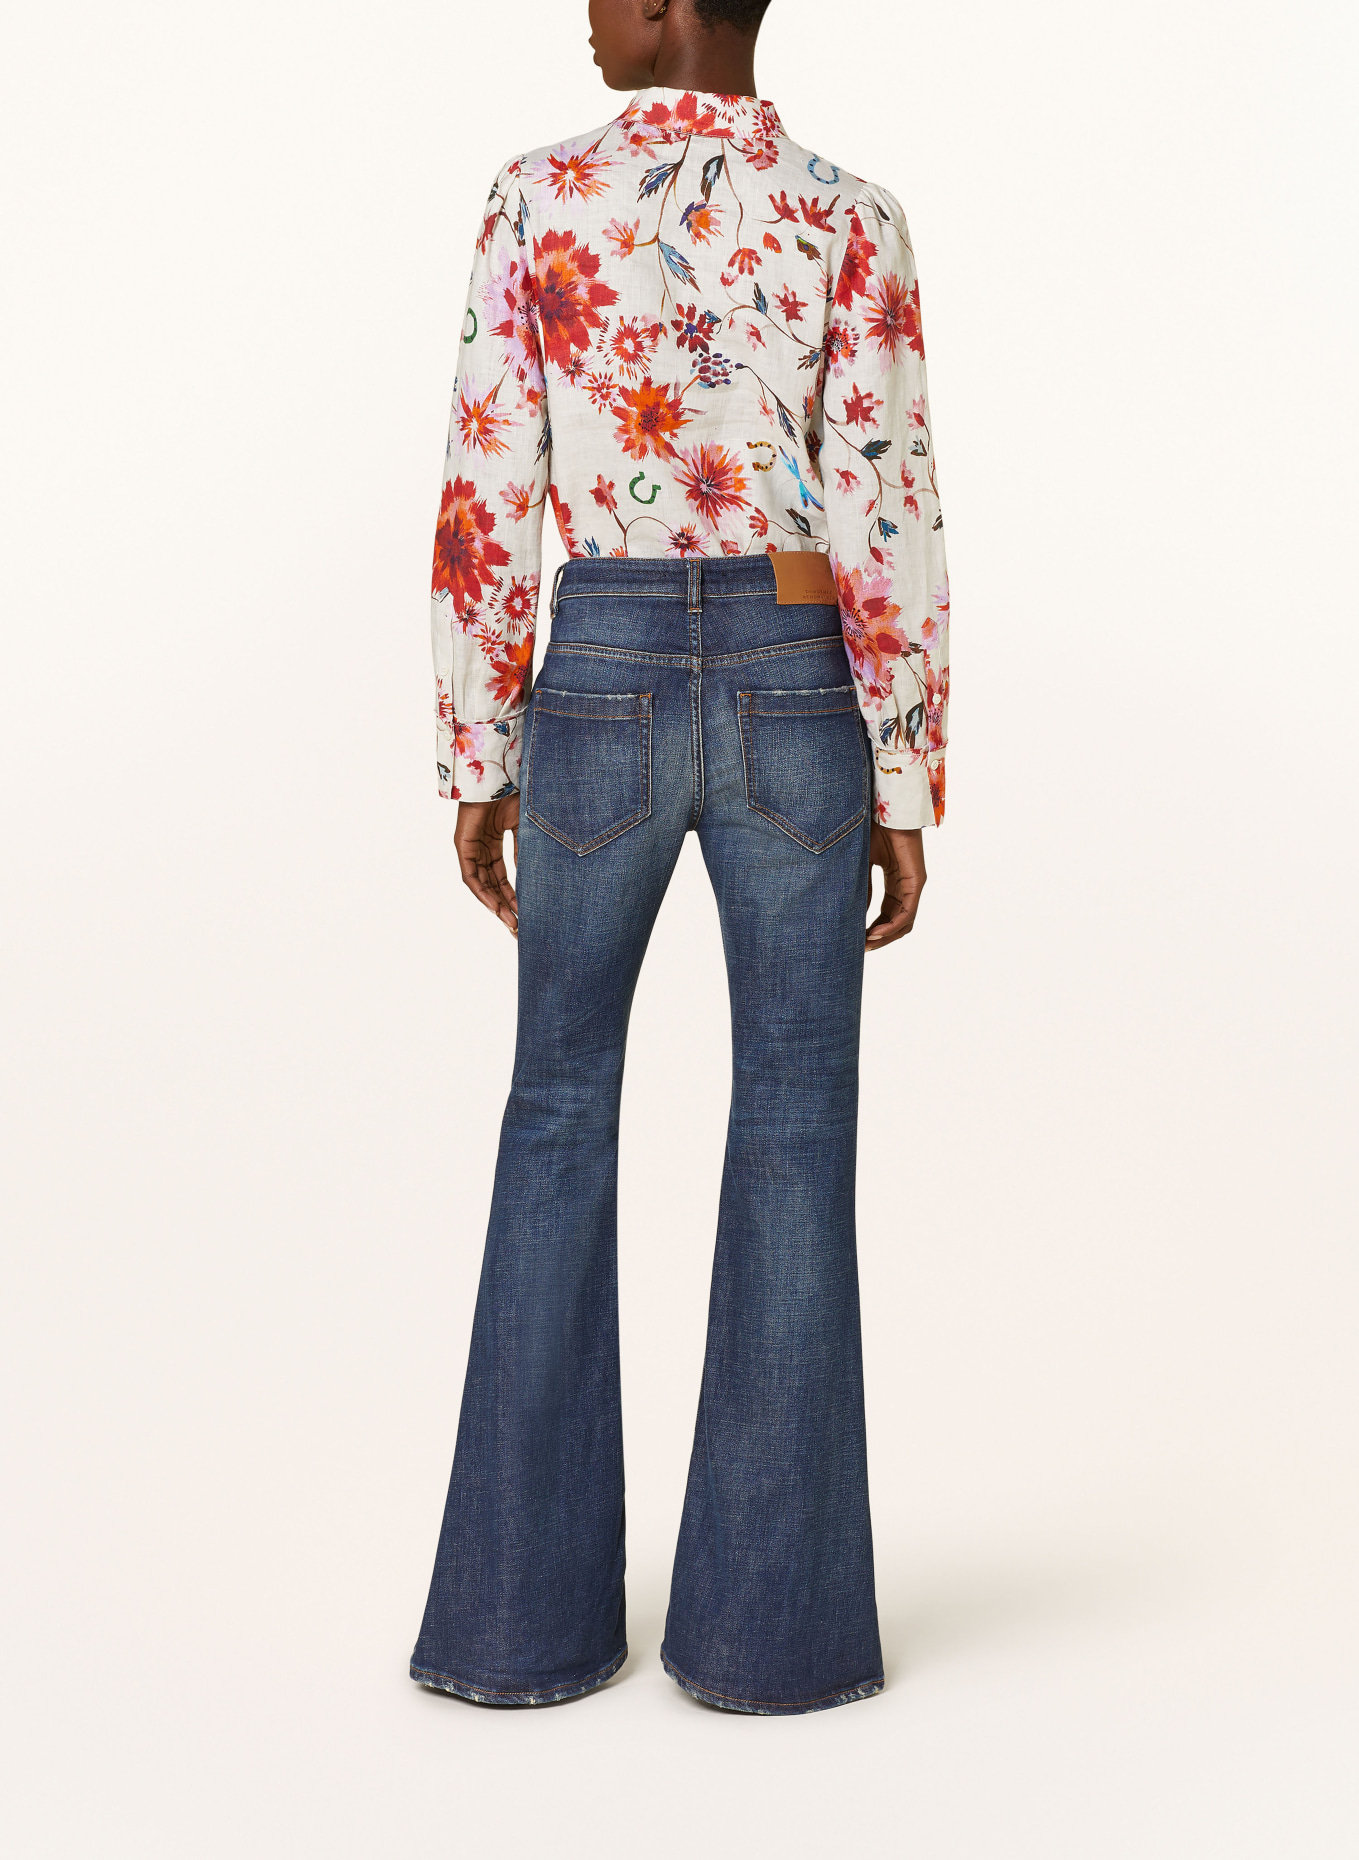 DOROTHEE SCHUMACHER Shirt blouse FLORAL EASE I BLOUSE made of linen, Color: CREAM/ RED/ BLUE (Image 3)